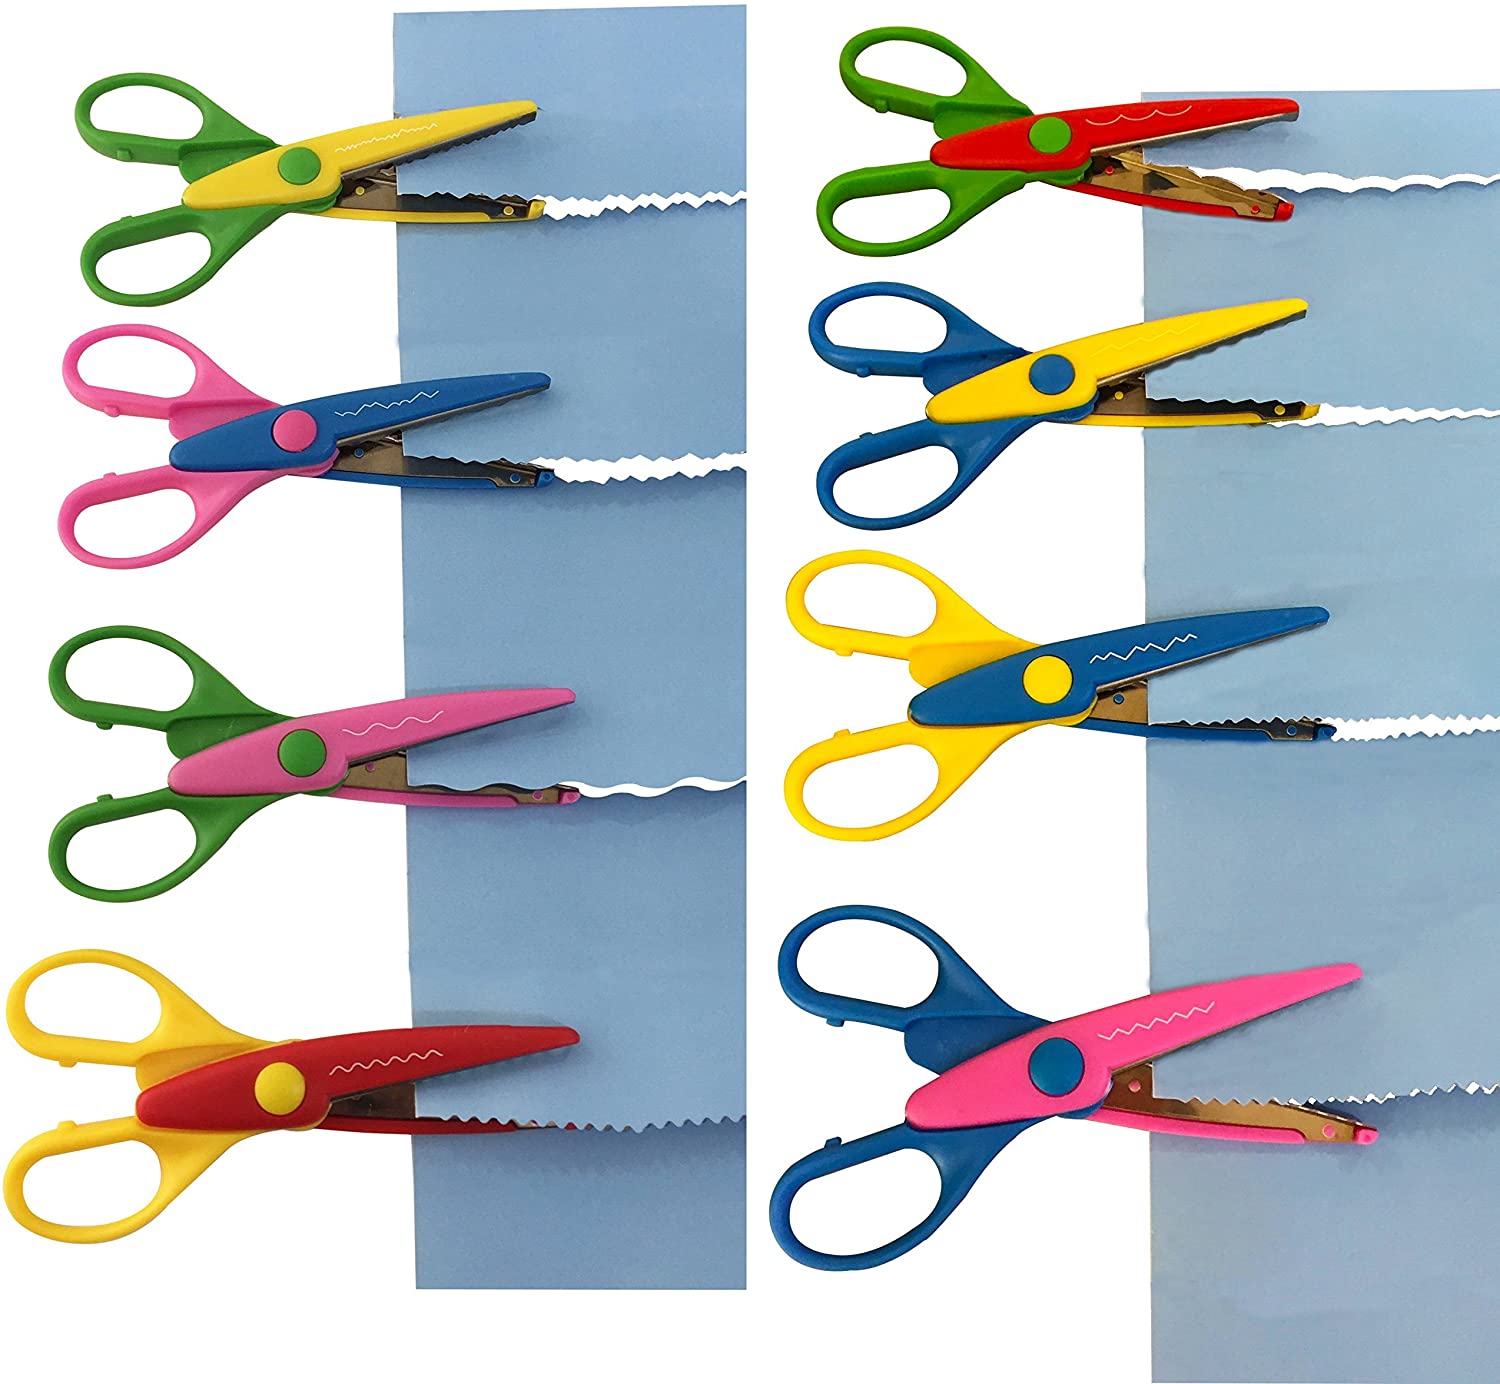 EXERZ Craft Scissors 8pcs with a Carrying Bag 8 Patterns